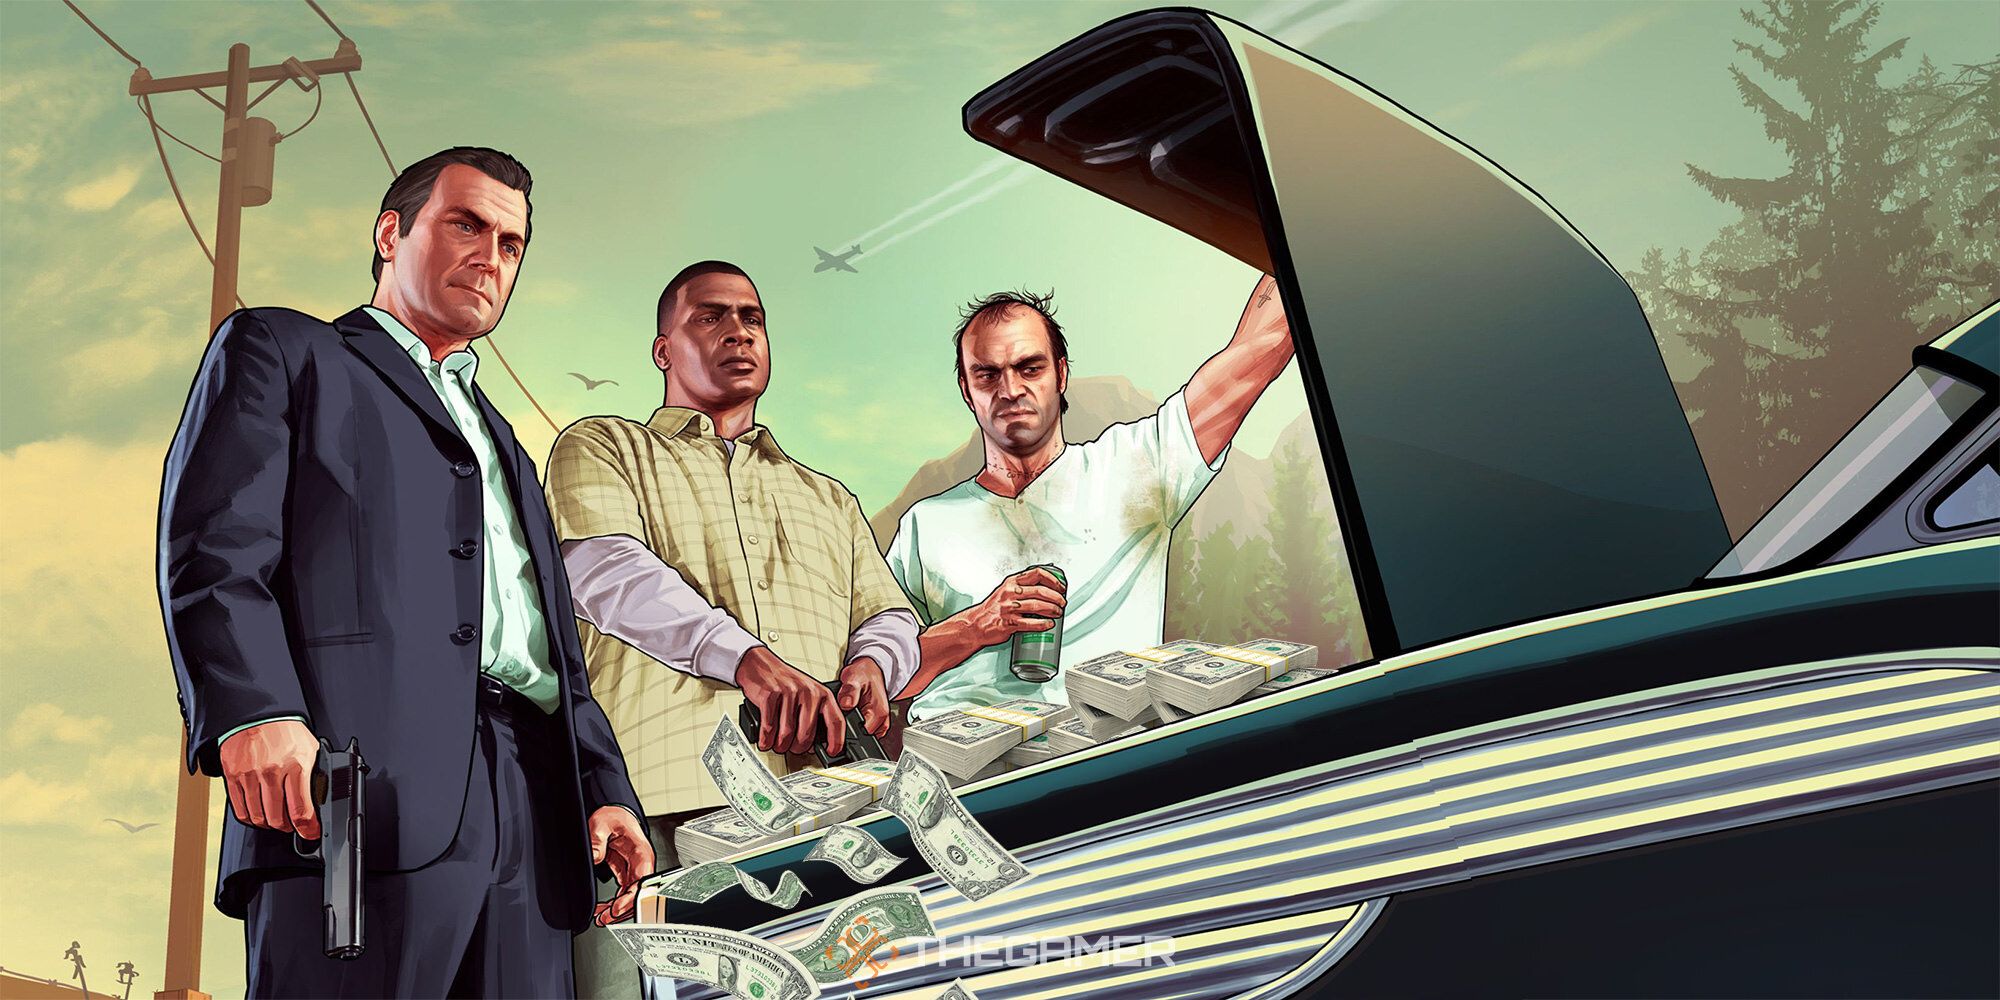 gta 5 stuffing money into the trunk of a car